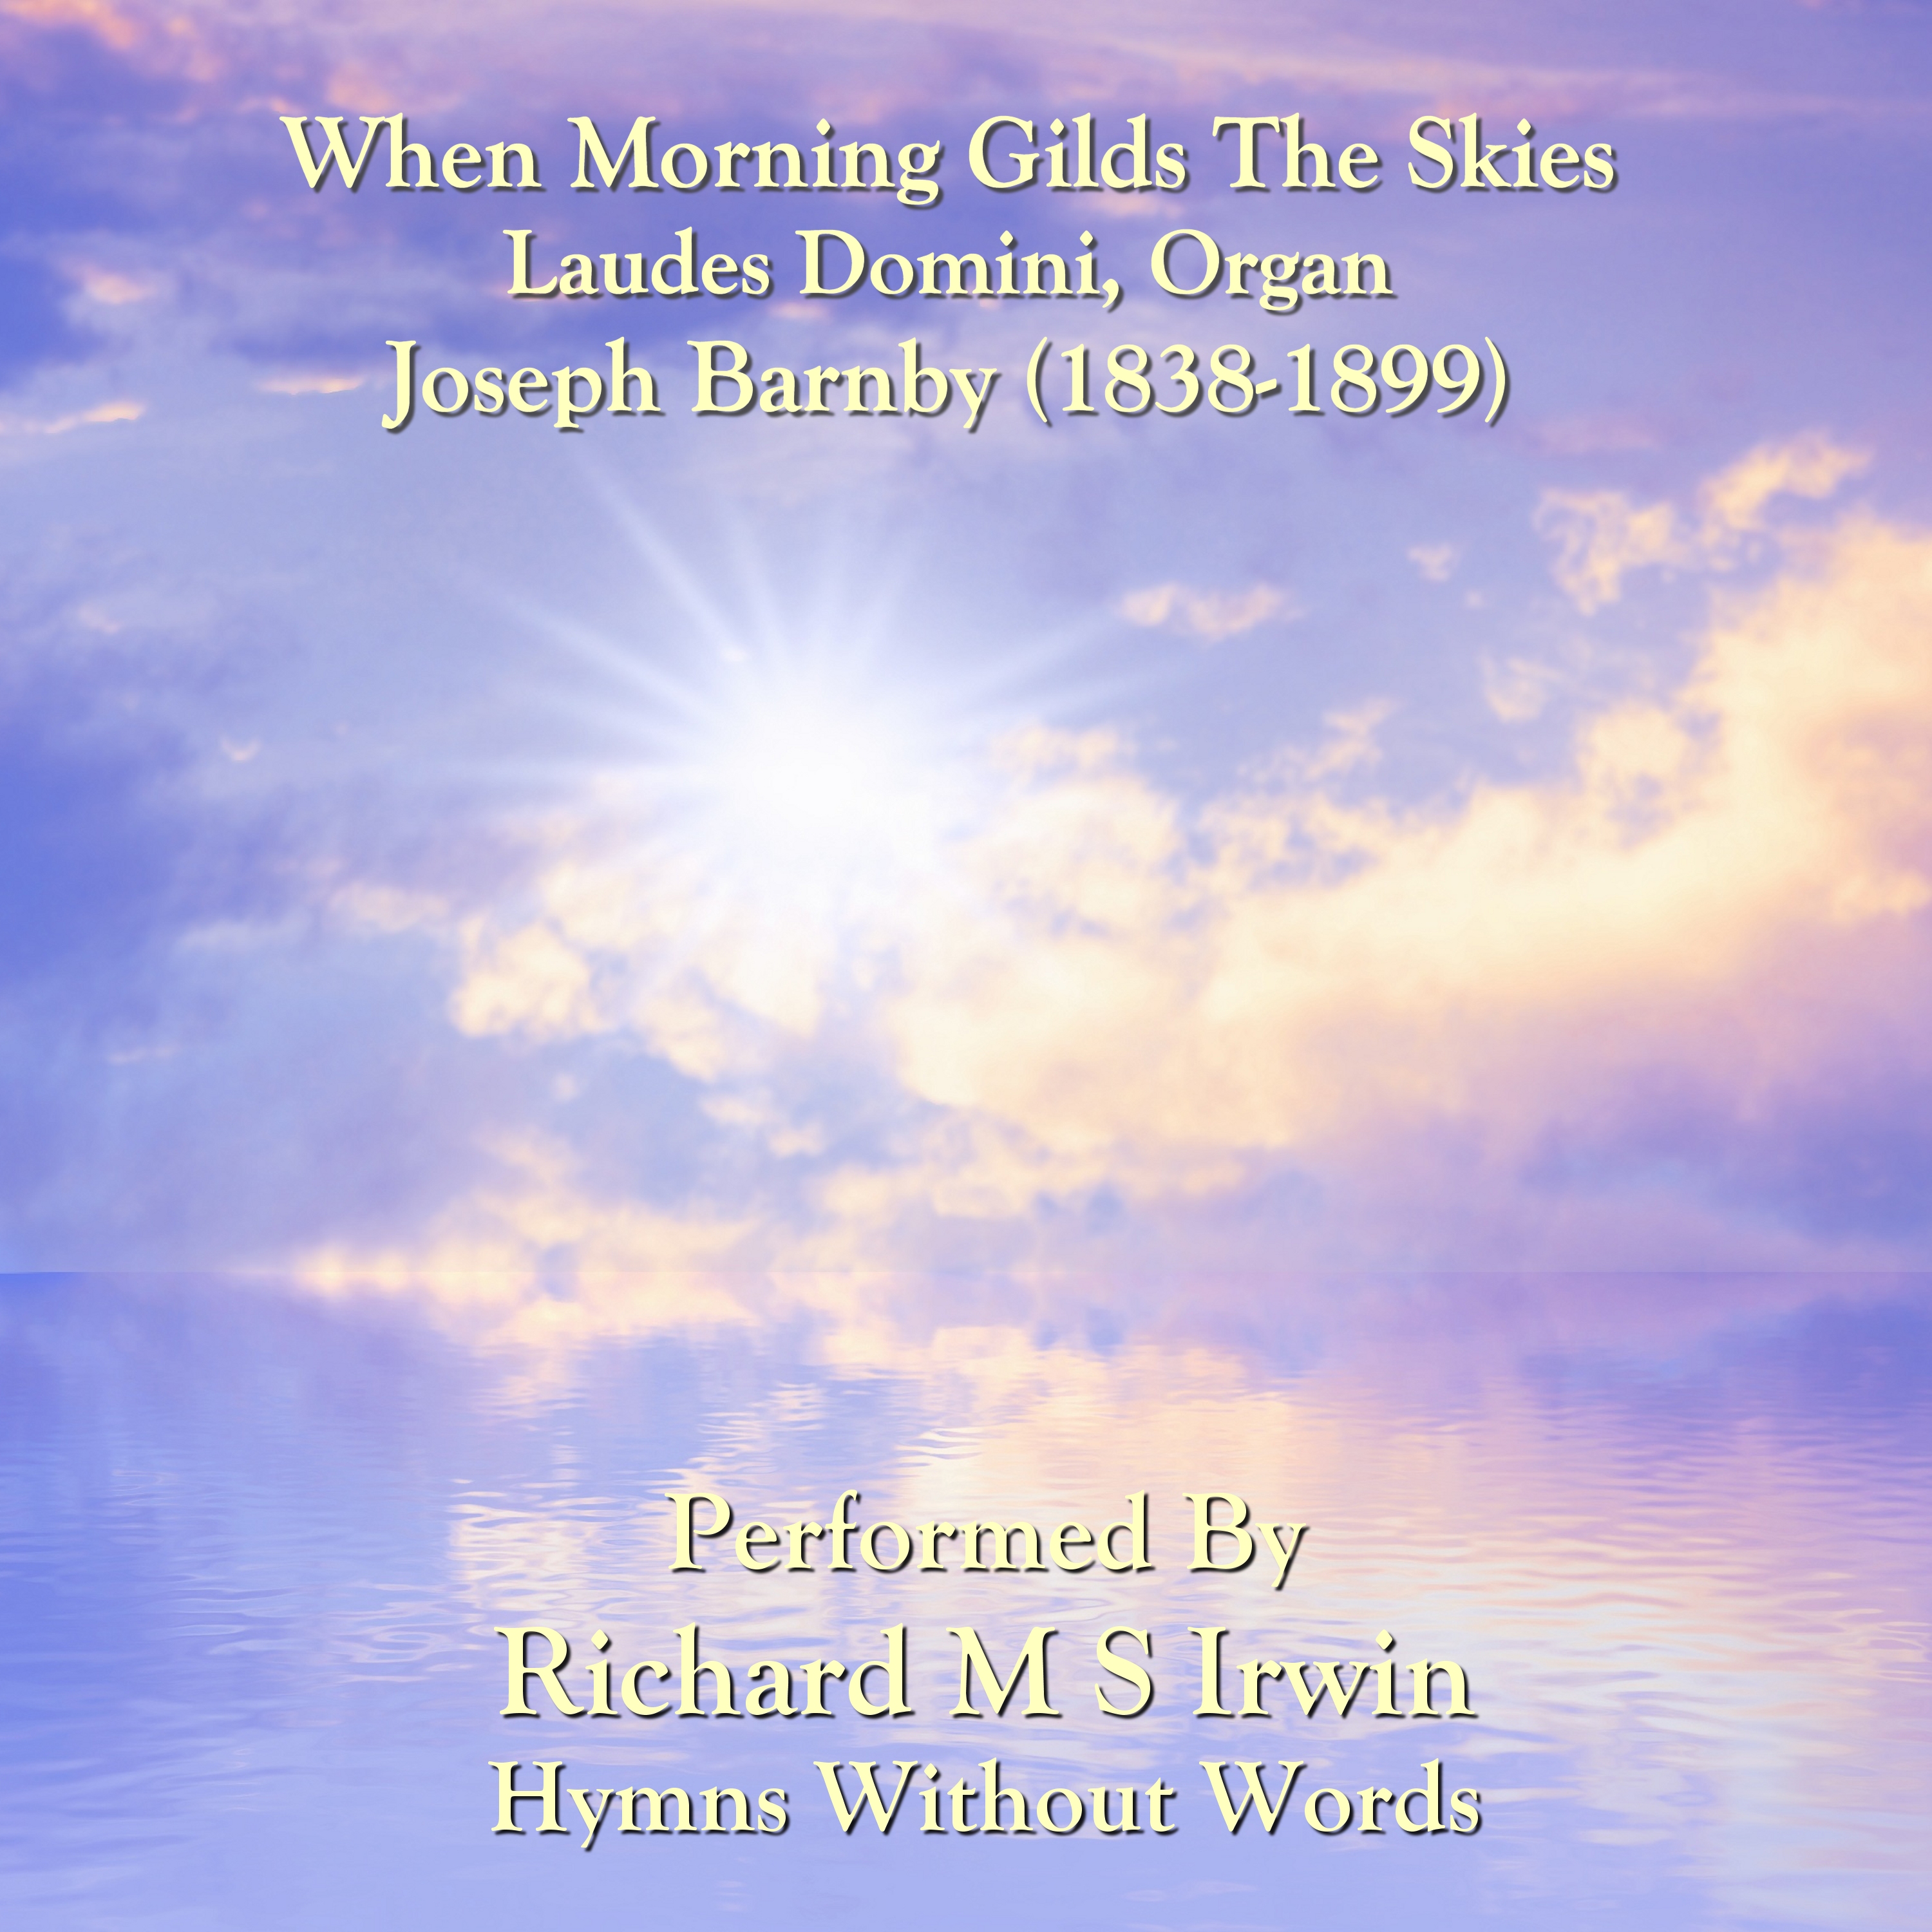 When Morning Gilds The Skies (Laudes Domini, Organ)